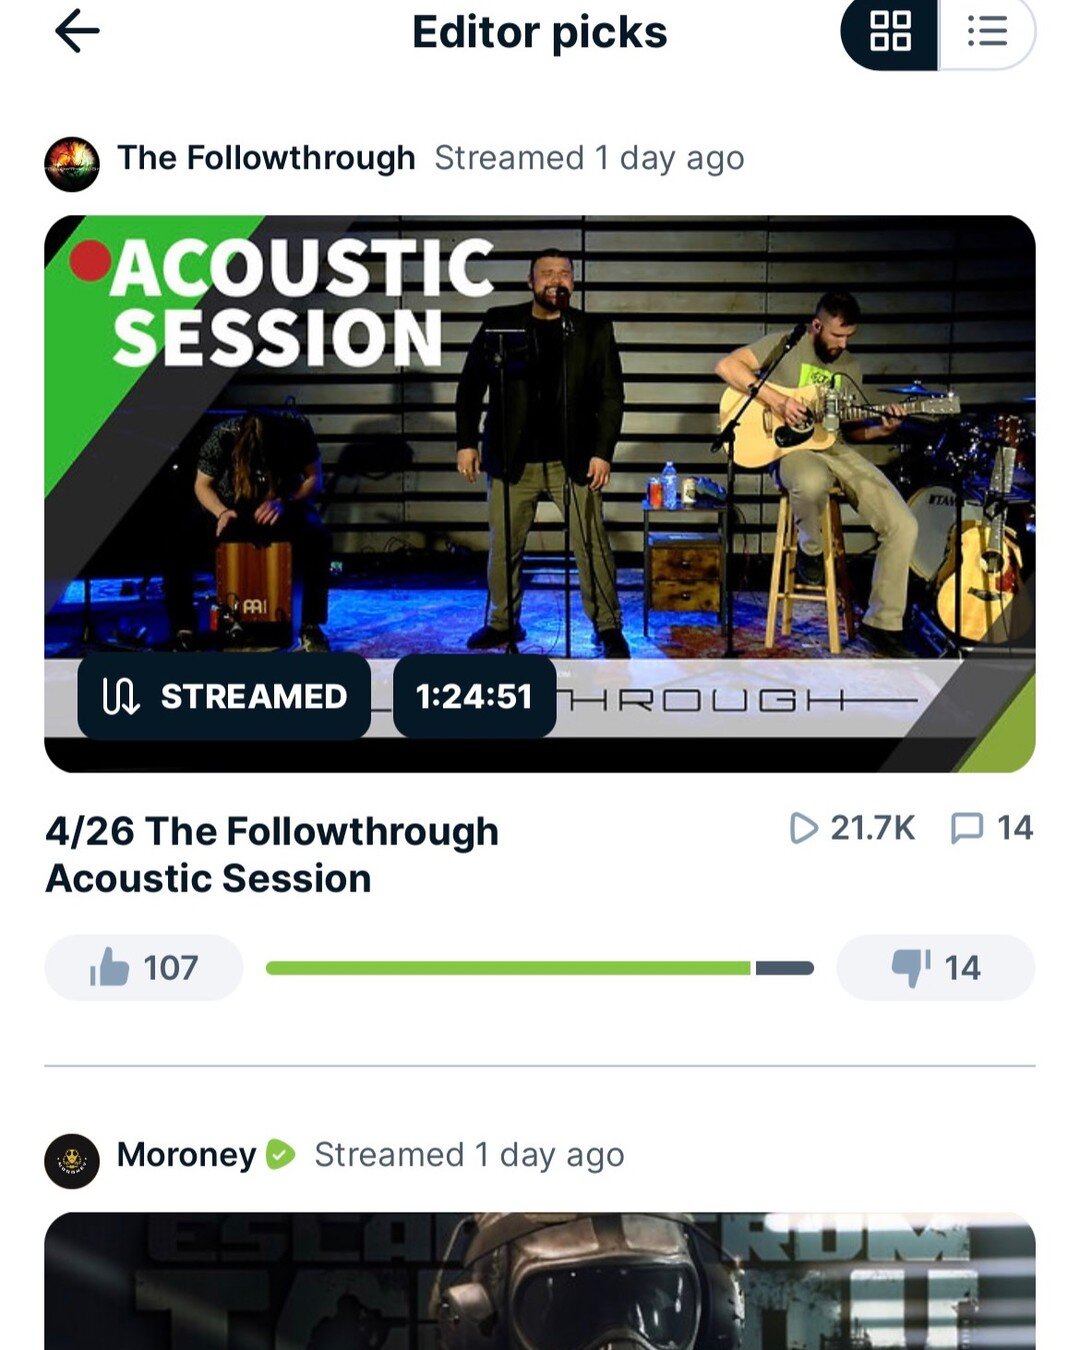 THANK YOU TO EVERYONE THAT ATTENDED!!! Last night we had a blast performing live for our &quot;Acoustic Session&quot;! This time we were featured on @rumblecreators 's Homepage and &quot;Editor Picks&quot; list! Currently at 21.7K views and counting!